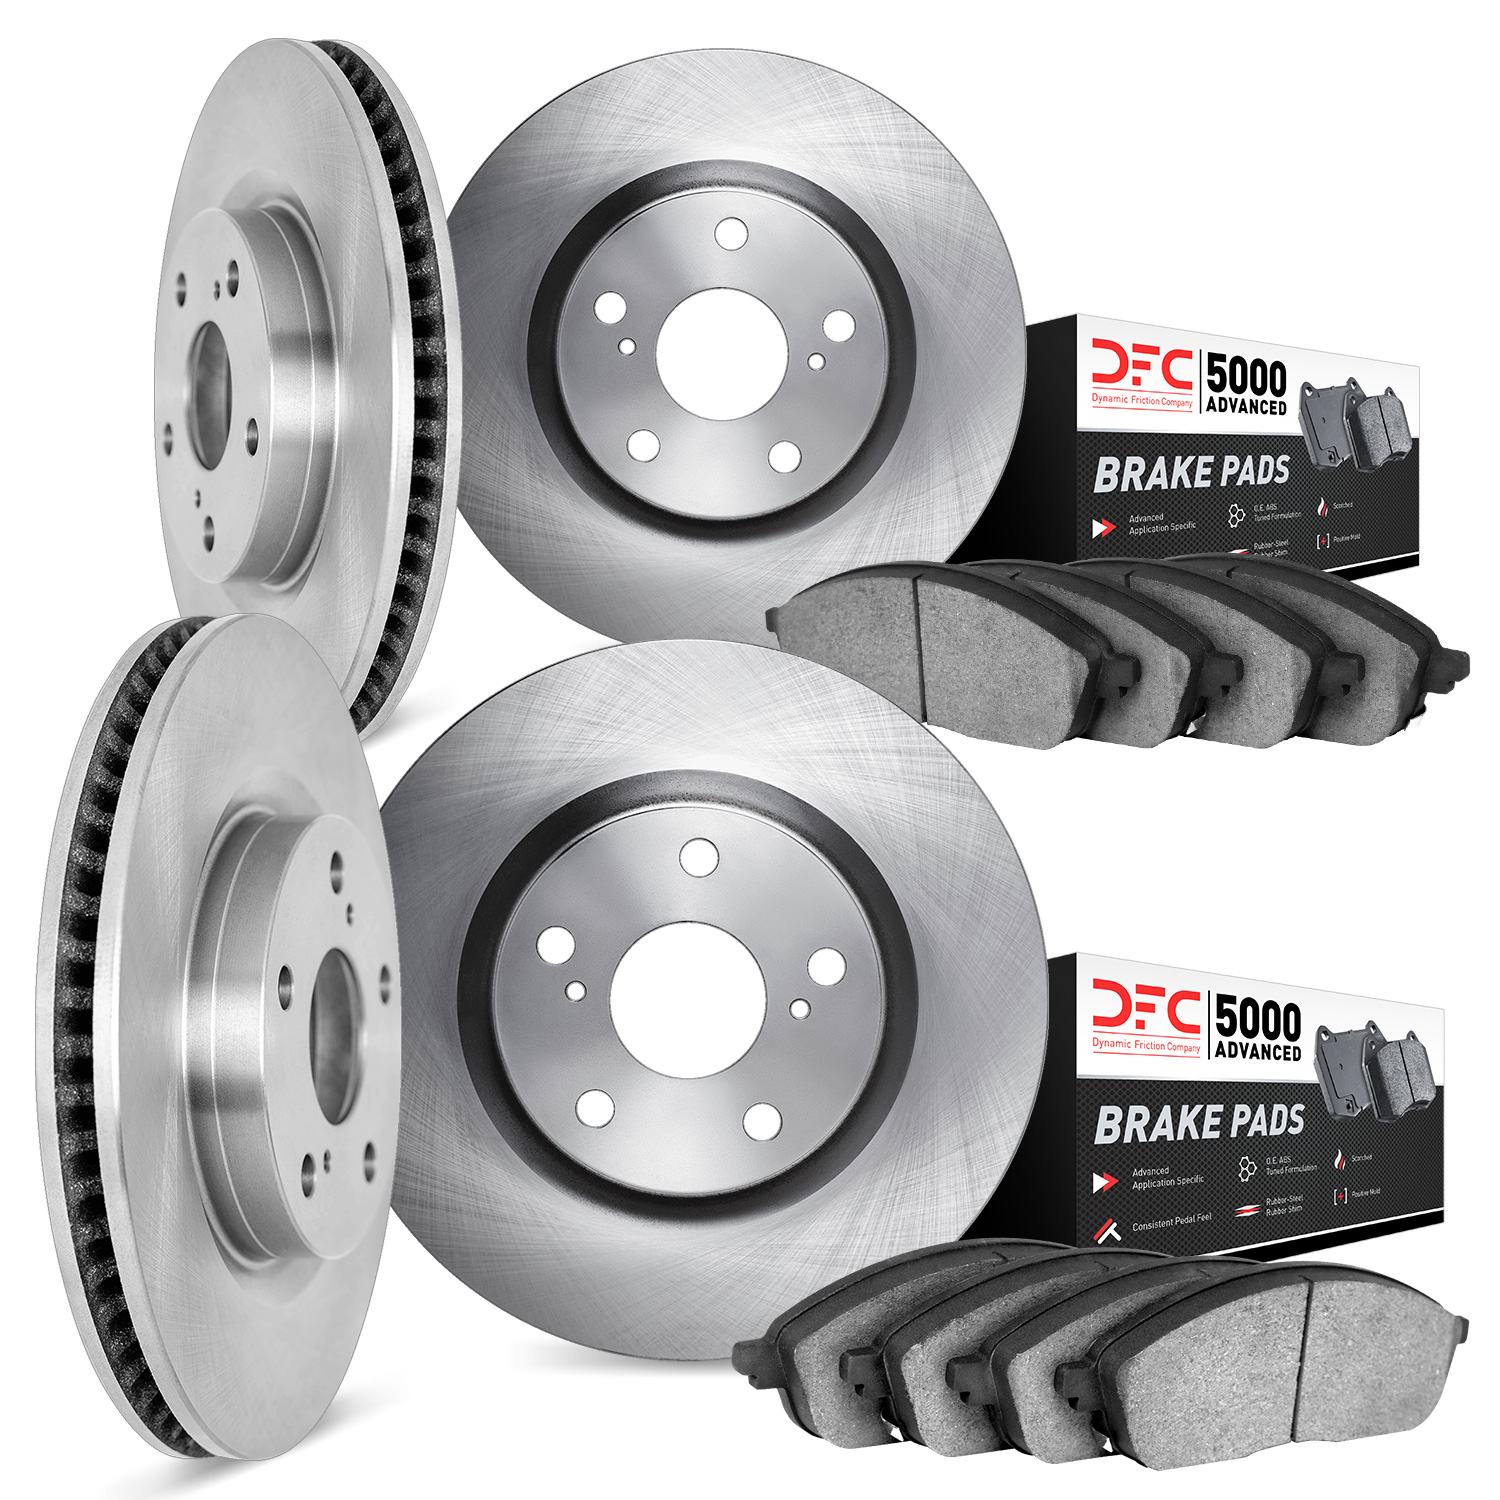 6504-31047 Brake Rotors w/5000 Advanced Brake Pads Kit, 2007-2014 BMW, Position: Front and Rear